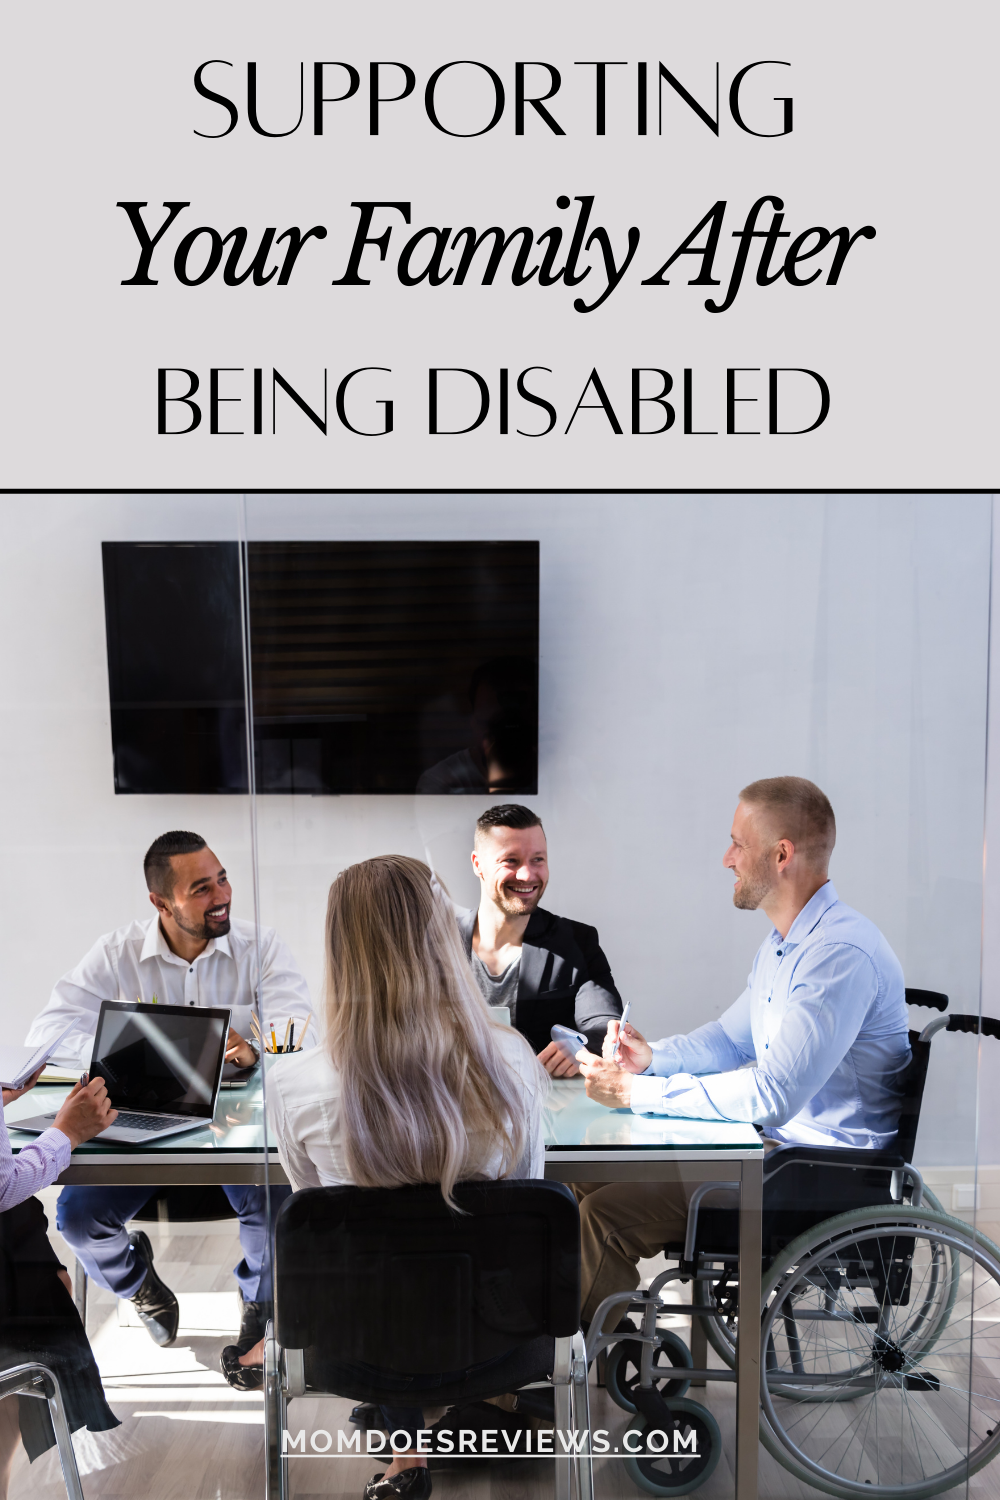 5 Ways to Take Care Of Your Family after Being Disabled at Work